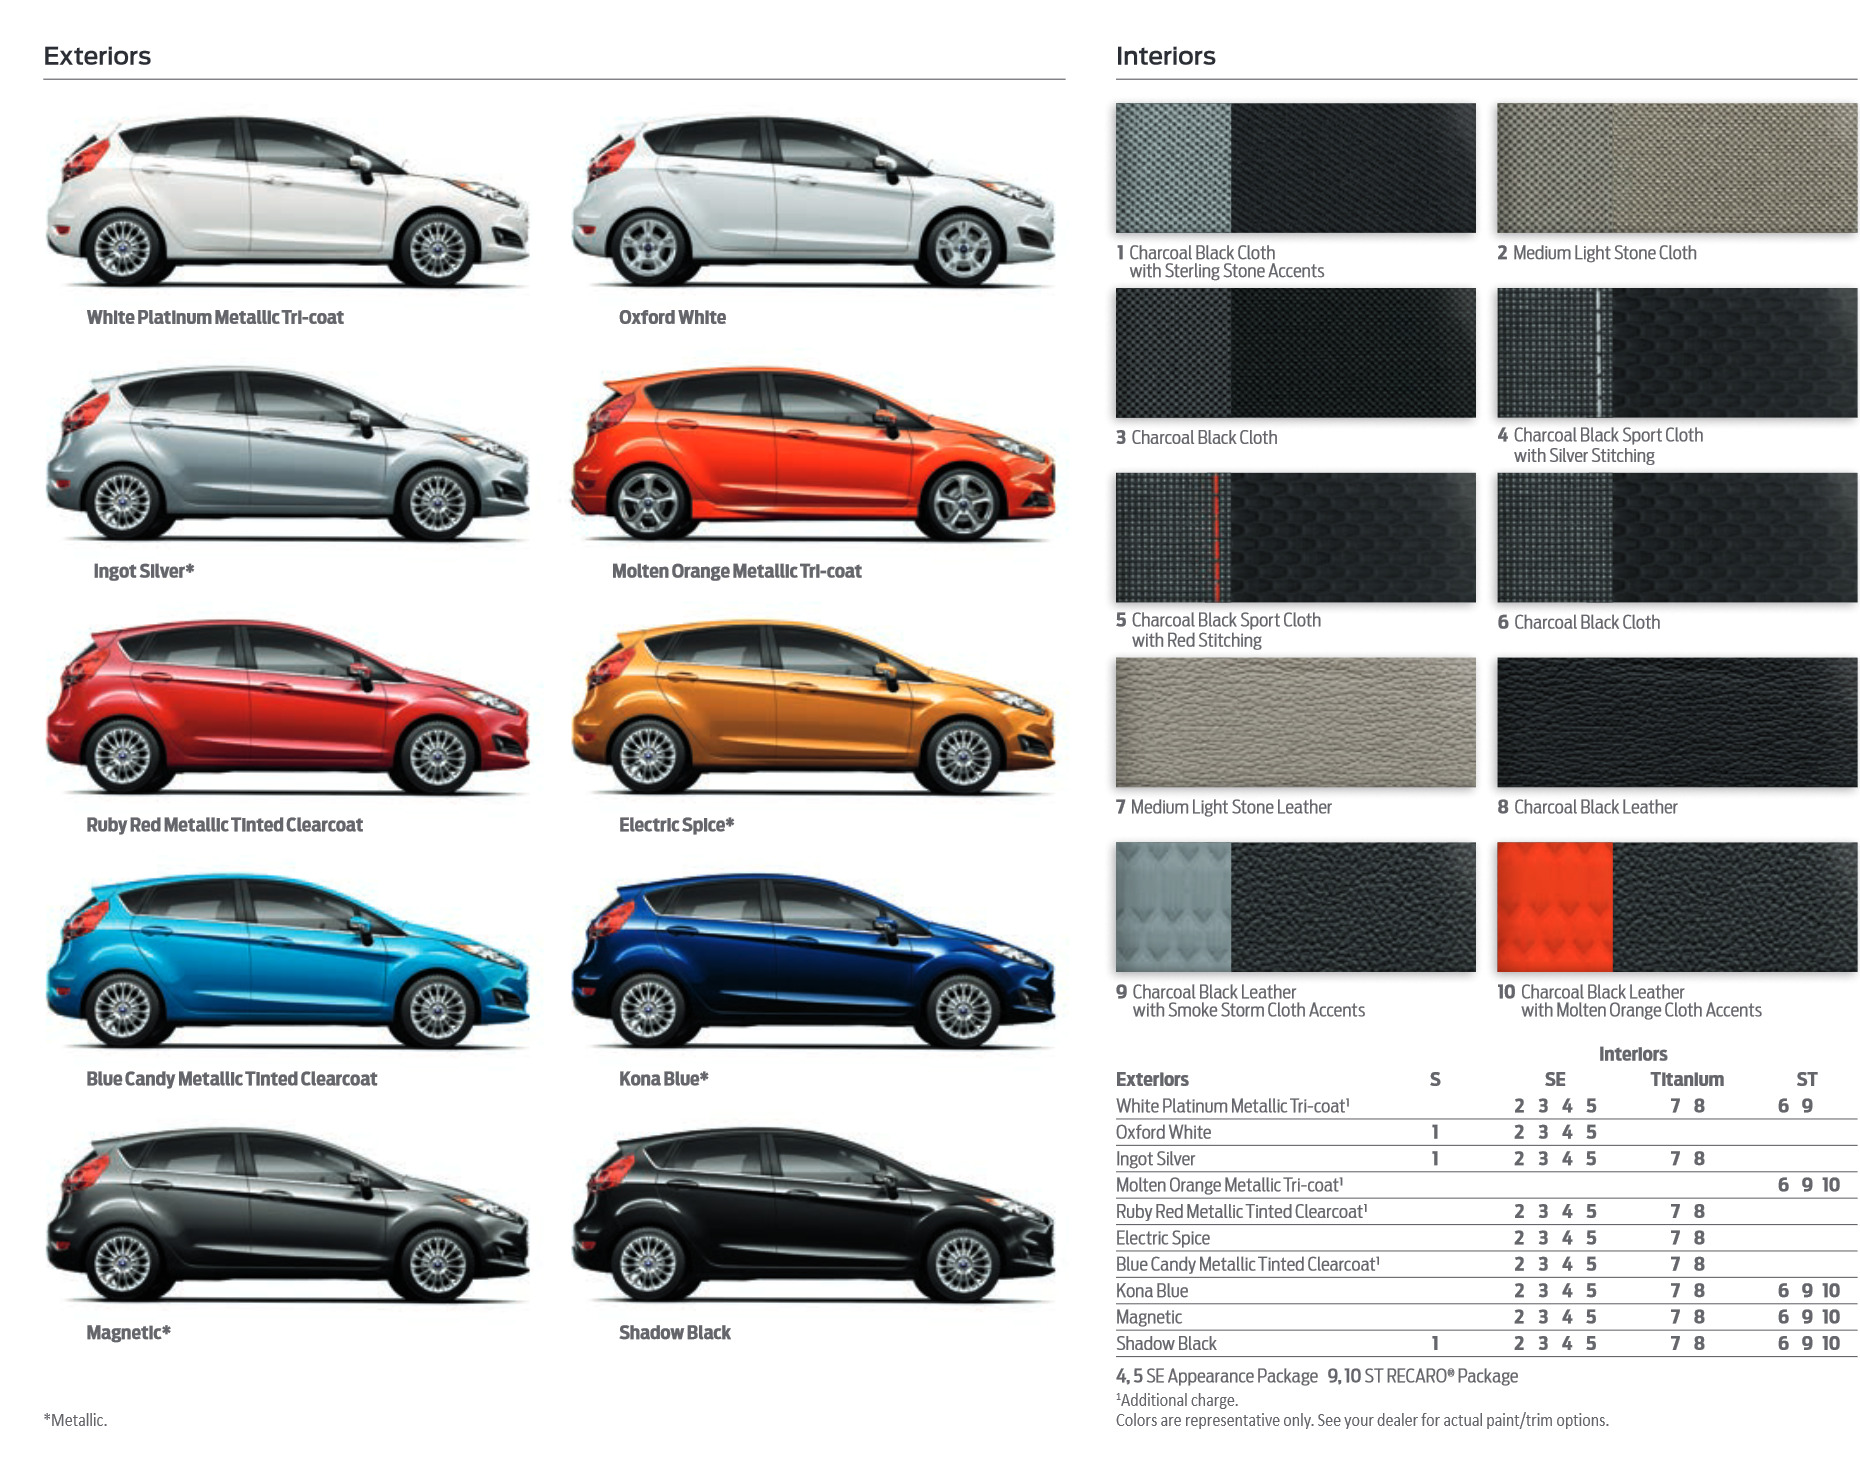 exterior color shades that the Ford Fiesta came in